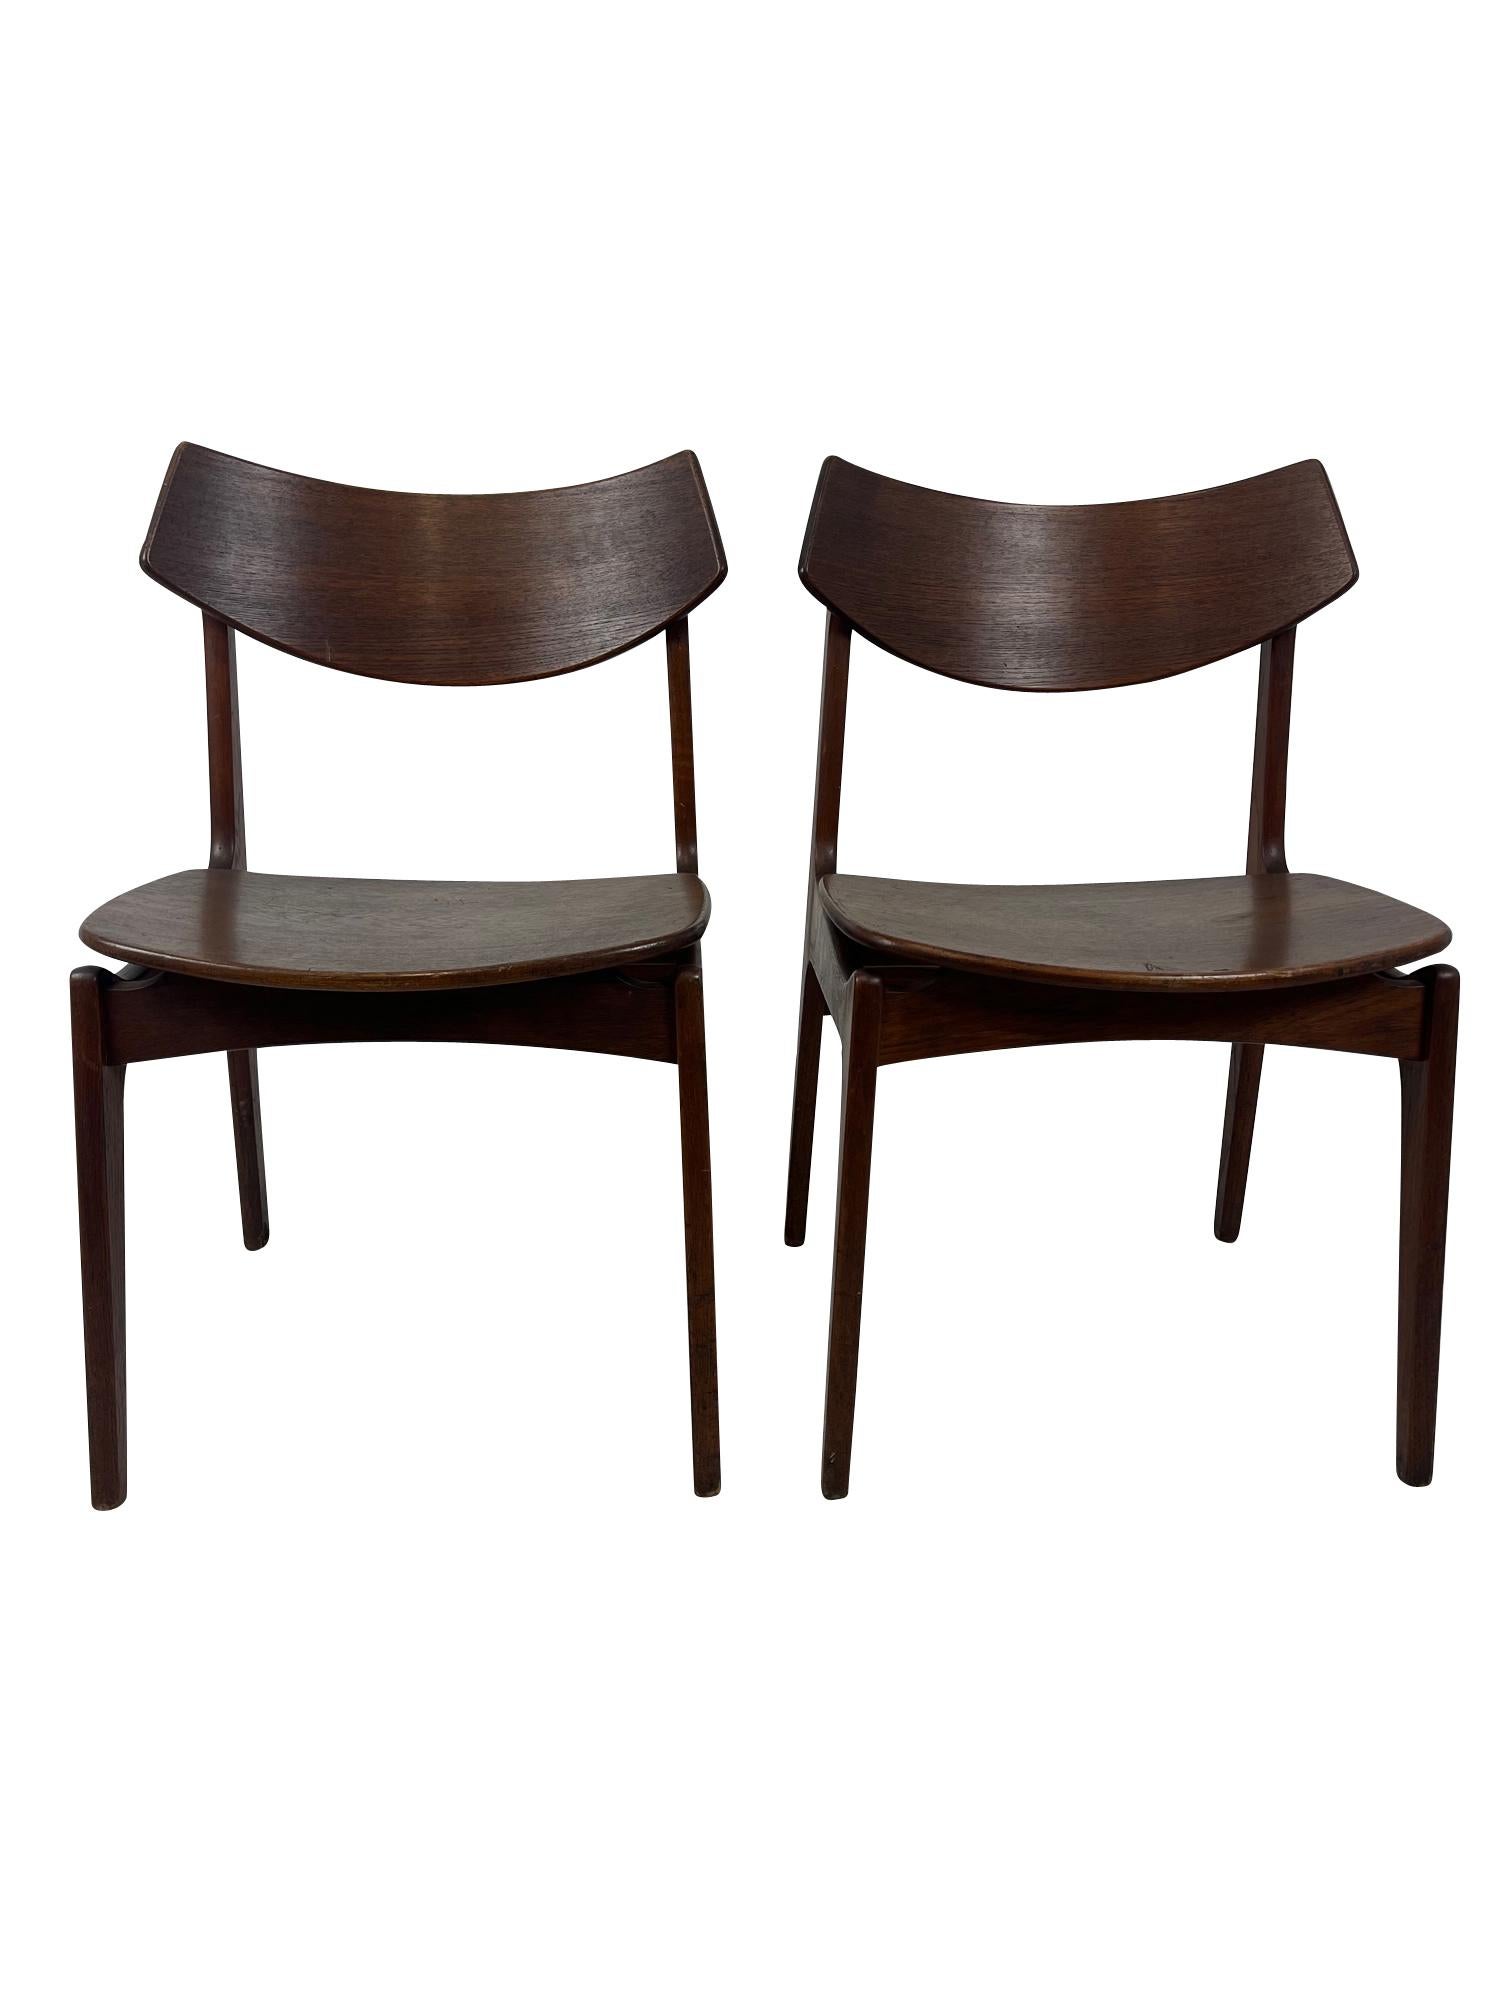 Set of 2l 1950’s dining chairs designed by Erik Buch for Funder-Schmidt & Madsen, Odense, Denmark.
Two chairs have brand marks and two have paper labels on the underside.
Molded open grain teak plywood floating seat, curved backrests, sculpted frame